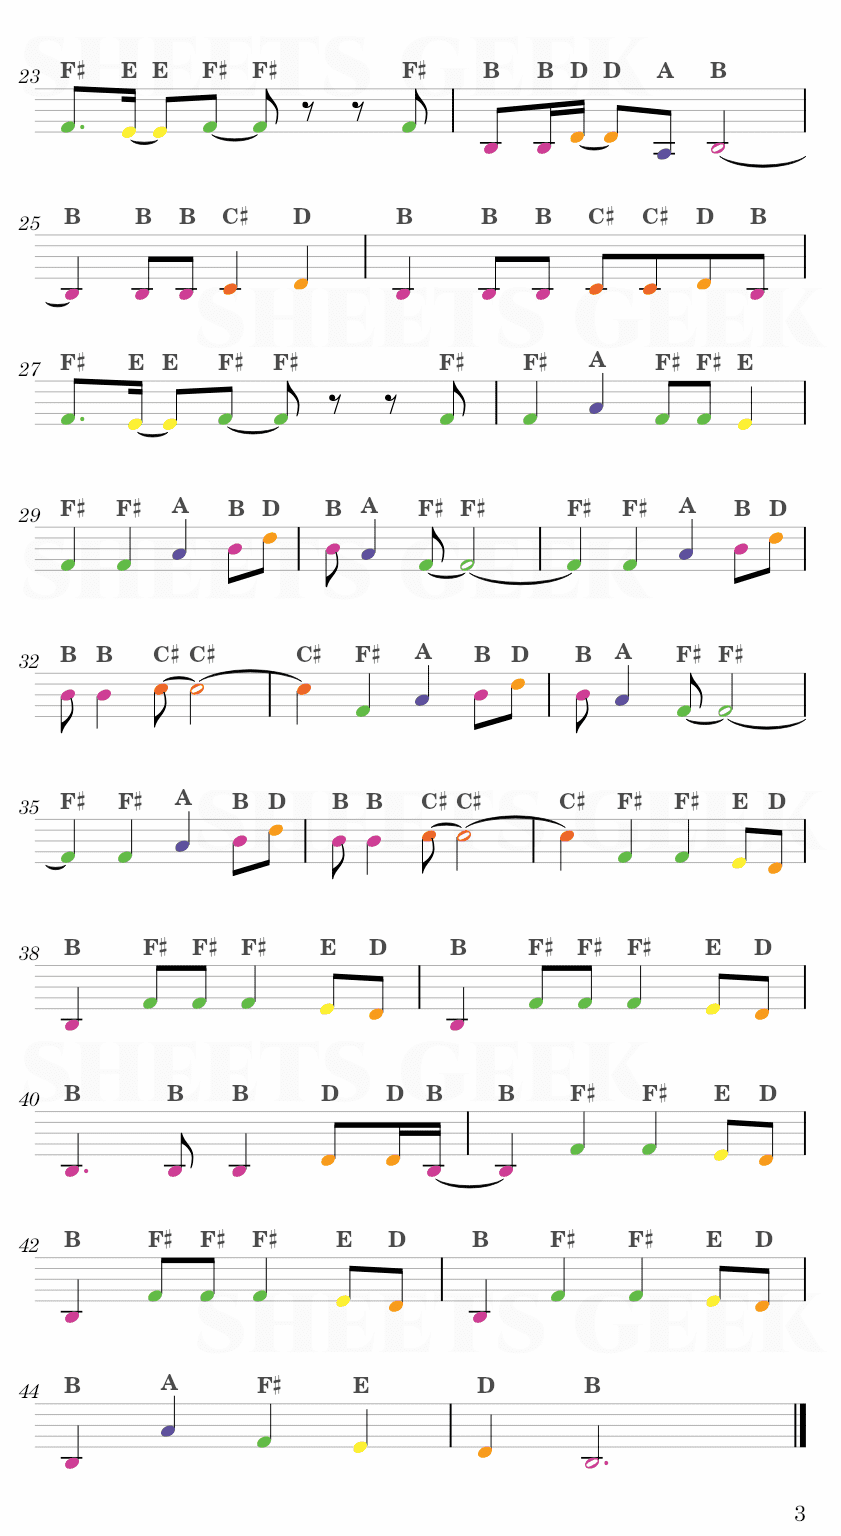 Lost in Paradise - Jujutsu Kaisen Ending 1 Easy Sheet Music Free for piano, keyboard, flute, violin, sax, cello page 3